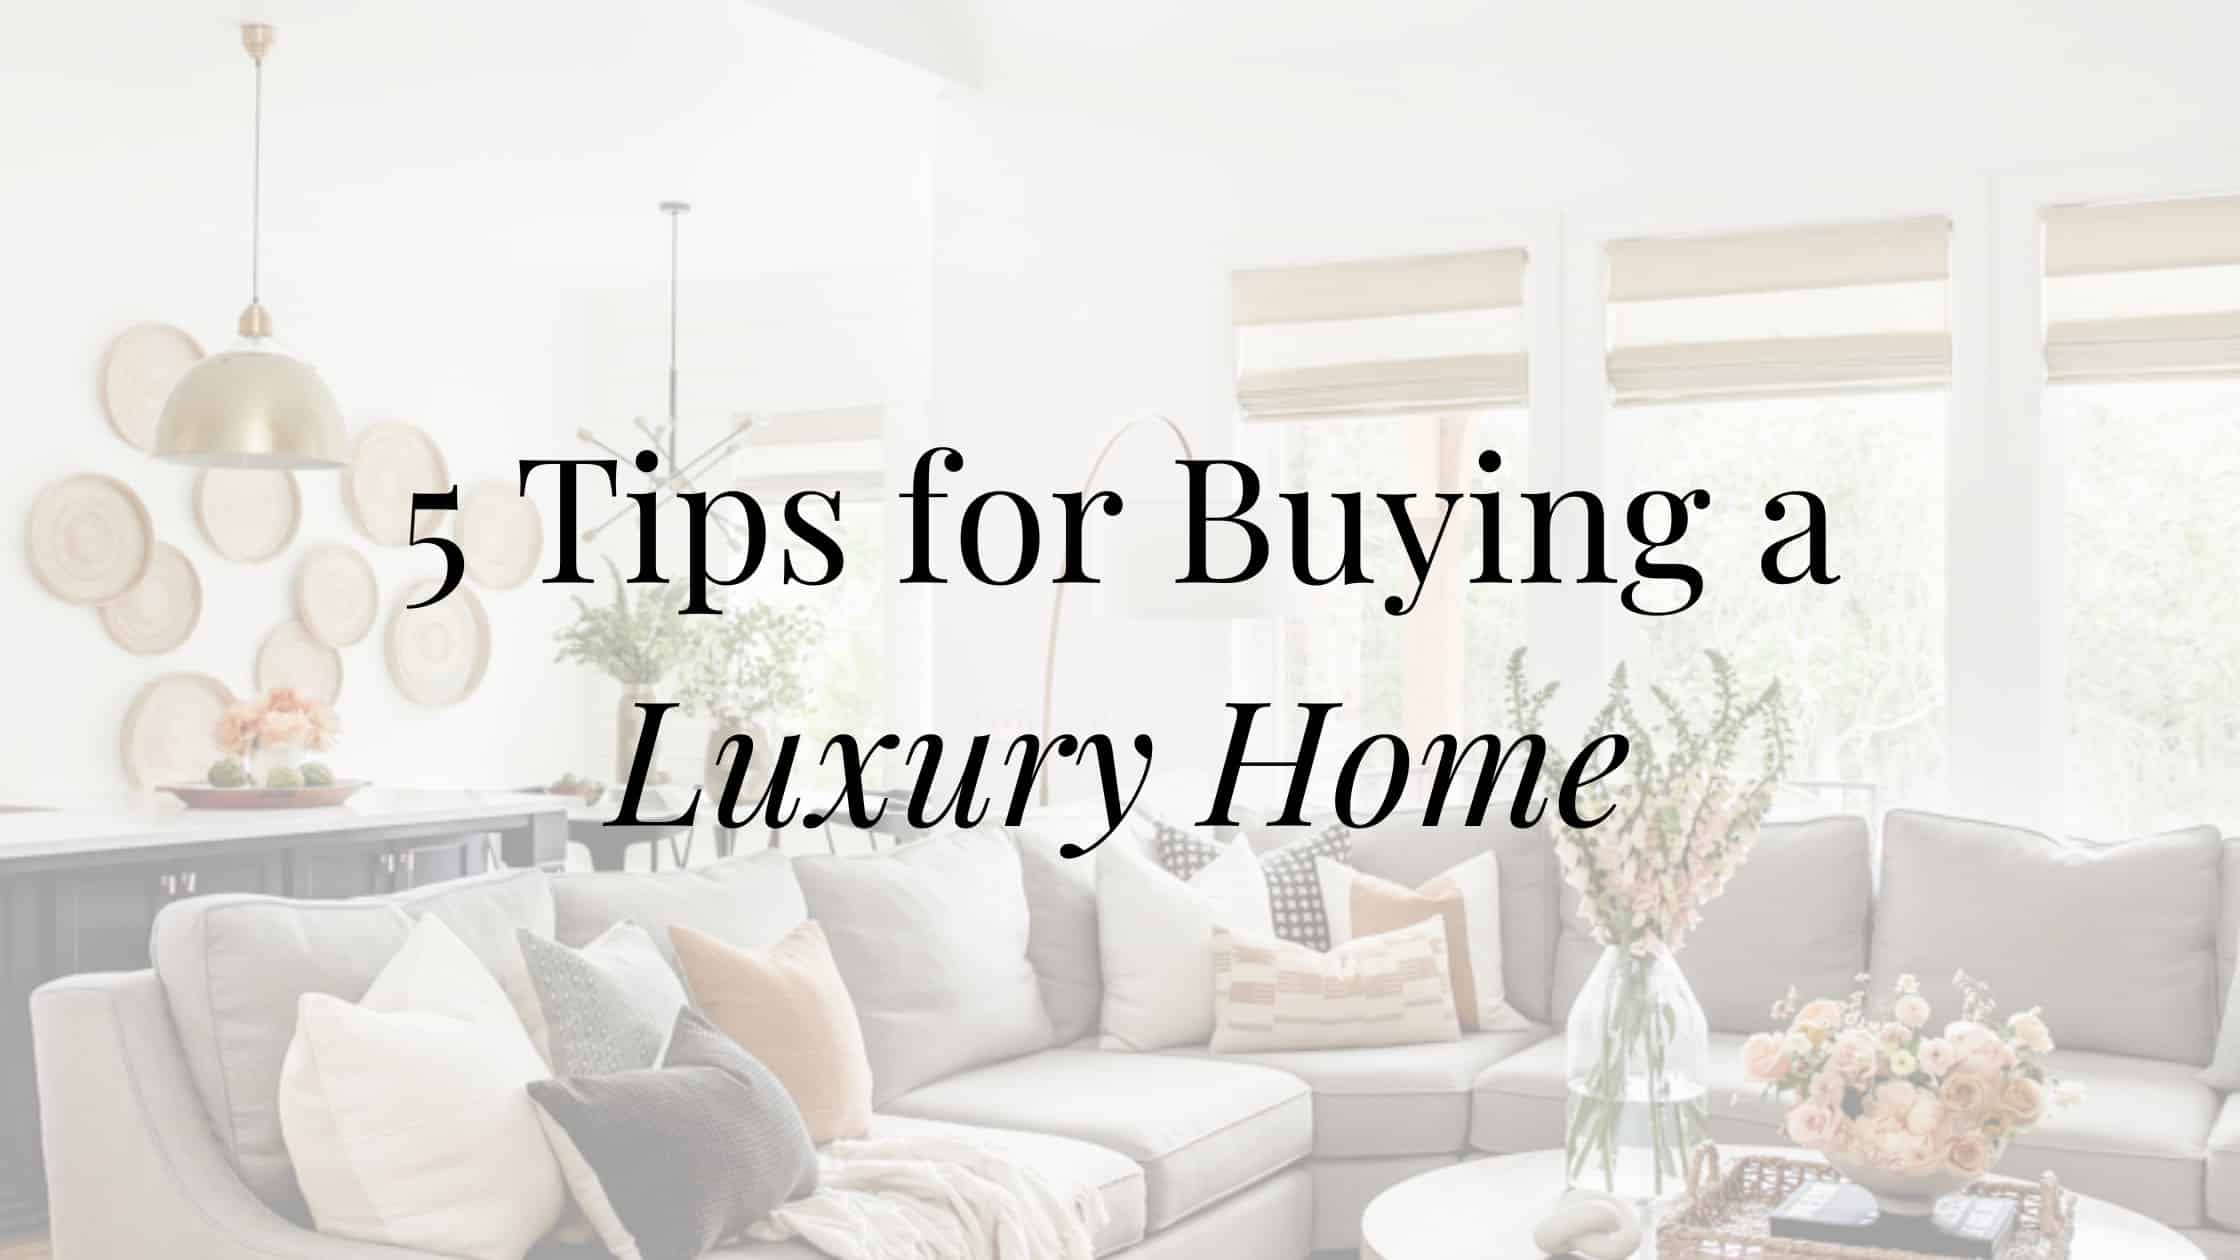 5 Tips for Buying a Luxury Home